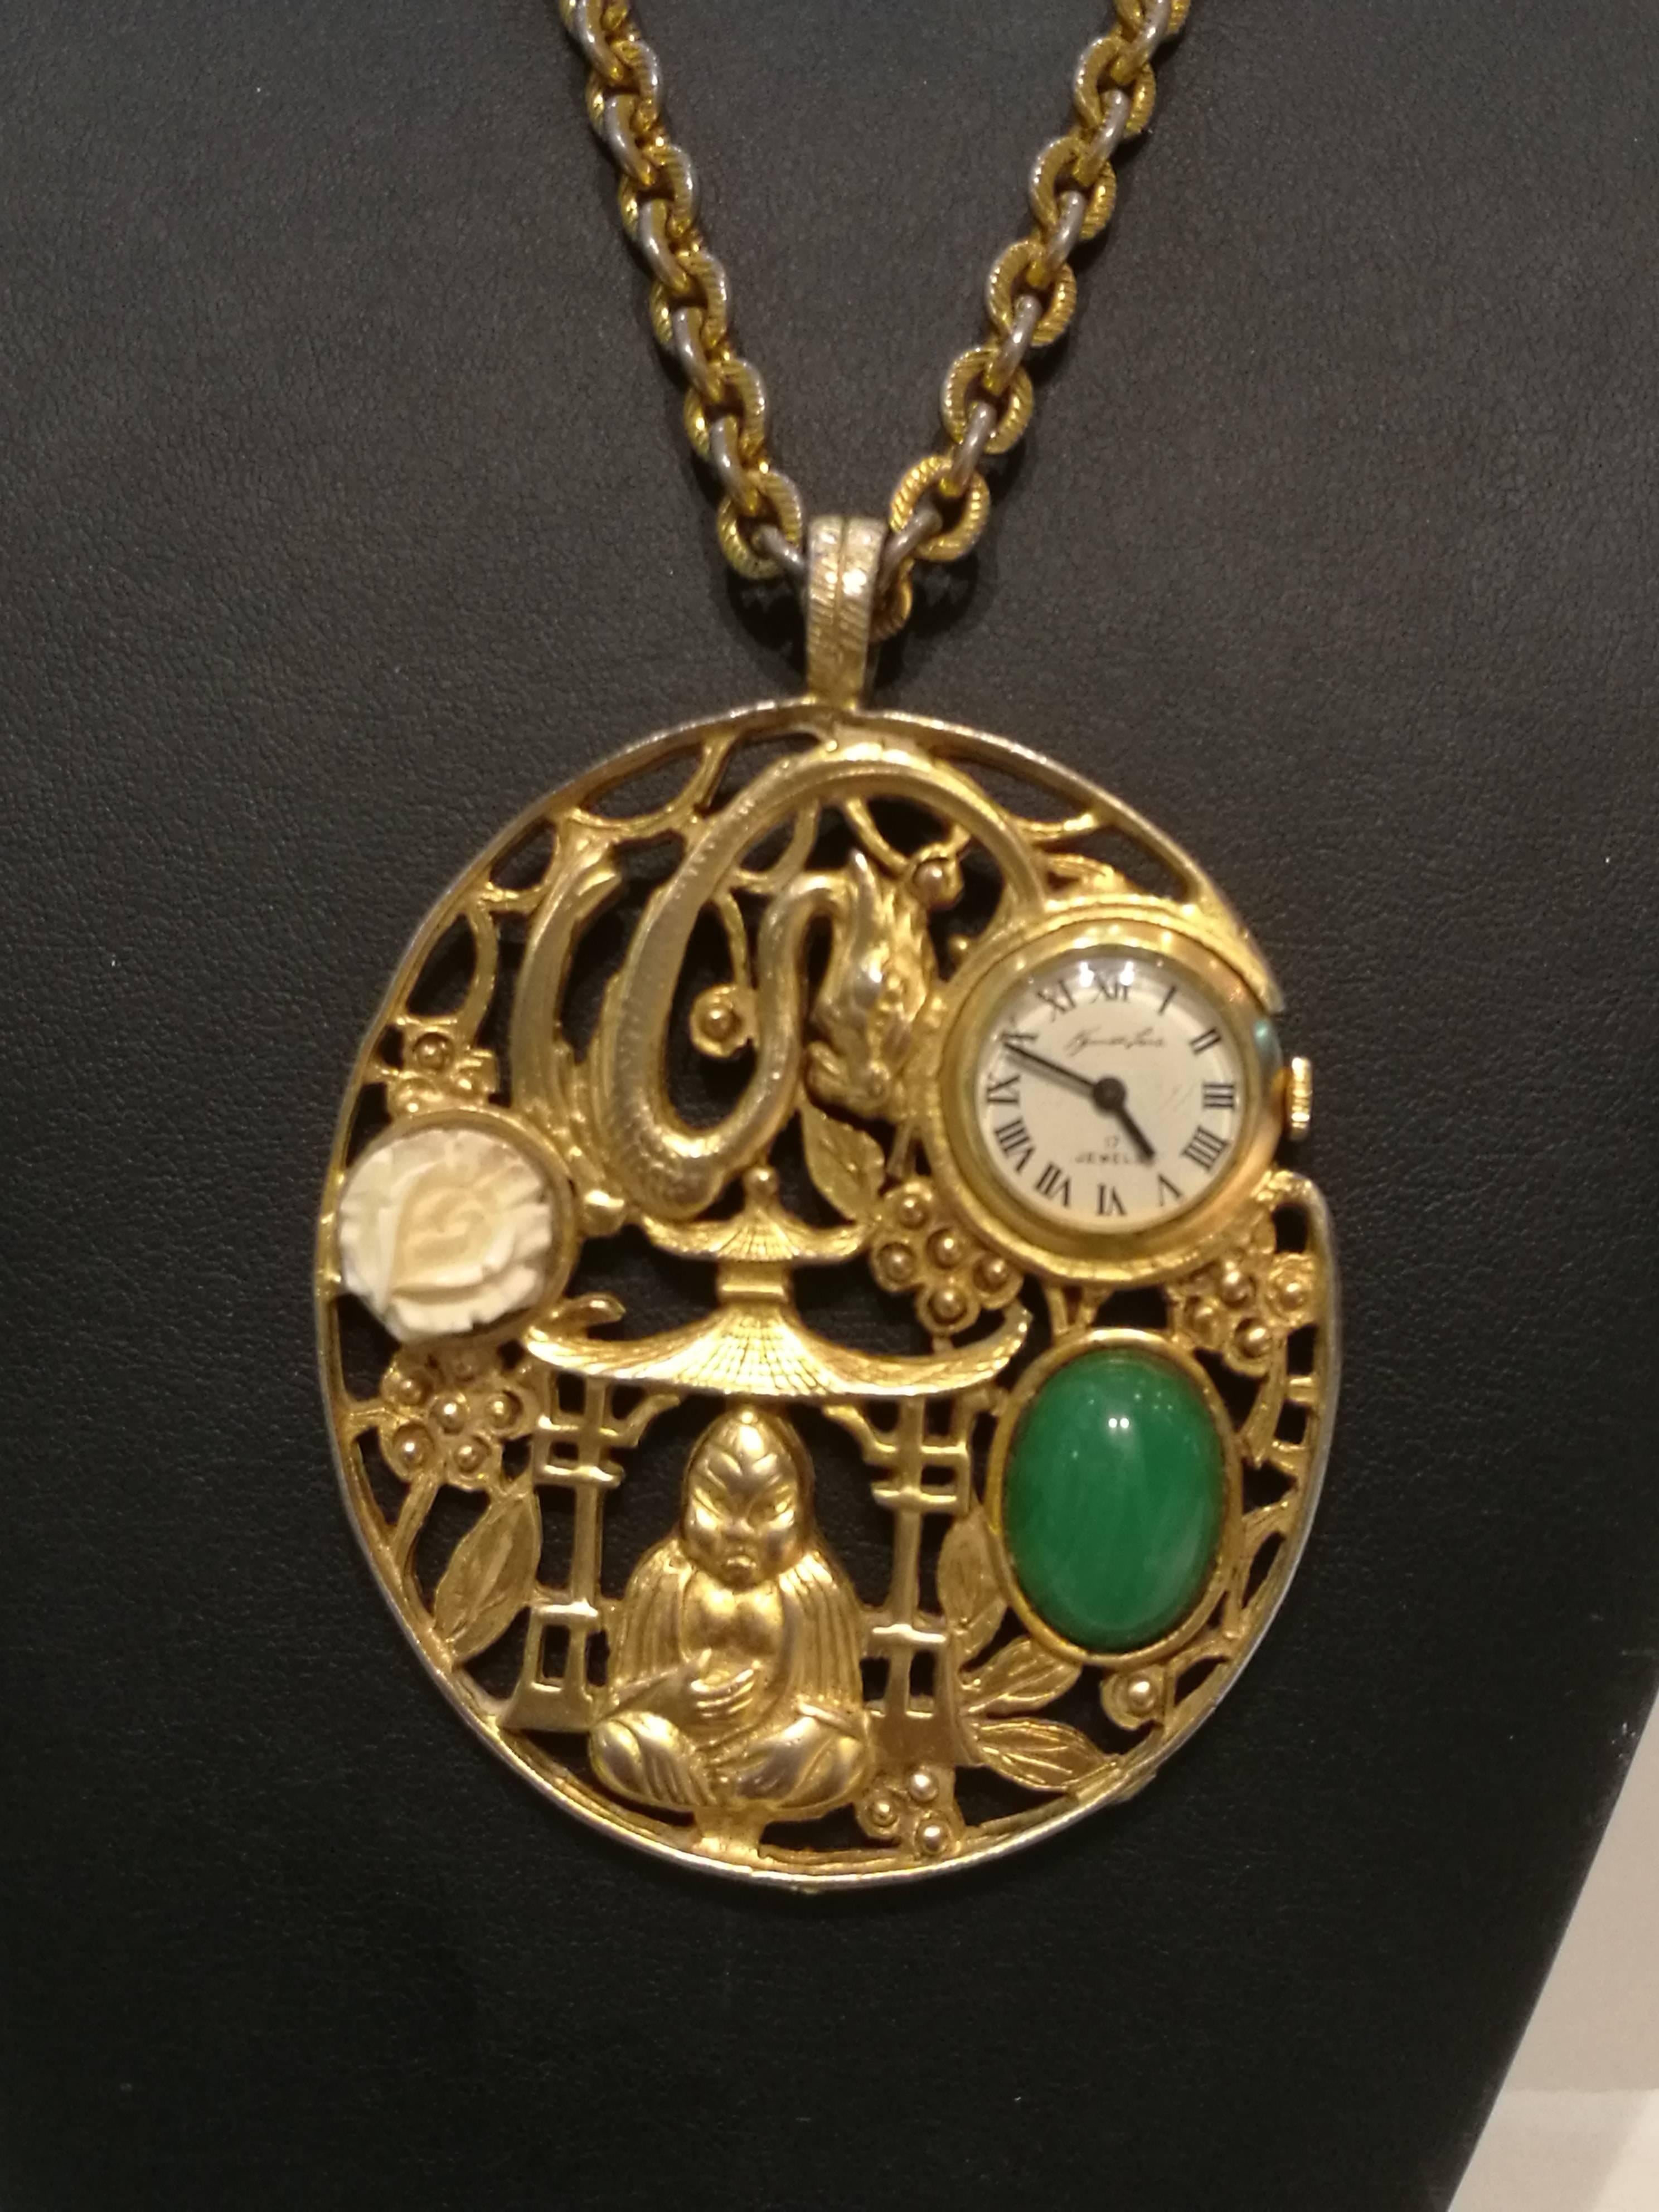 Kenneth Lane Necklace watch
Gold tone necklace with pendant including a small watch
Total lenght necklace: 72cm
pendant size: 
lenght9cm
widht6.5

Lane started designing jewelry and launched his business in 1963 whilst producing bejeweled